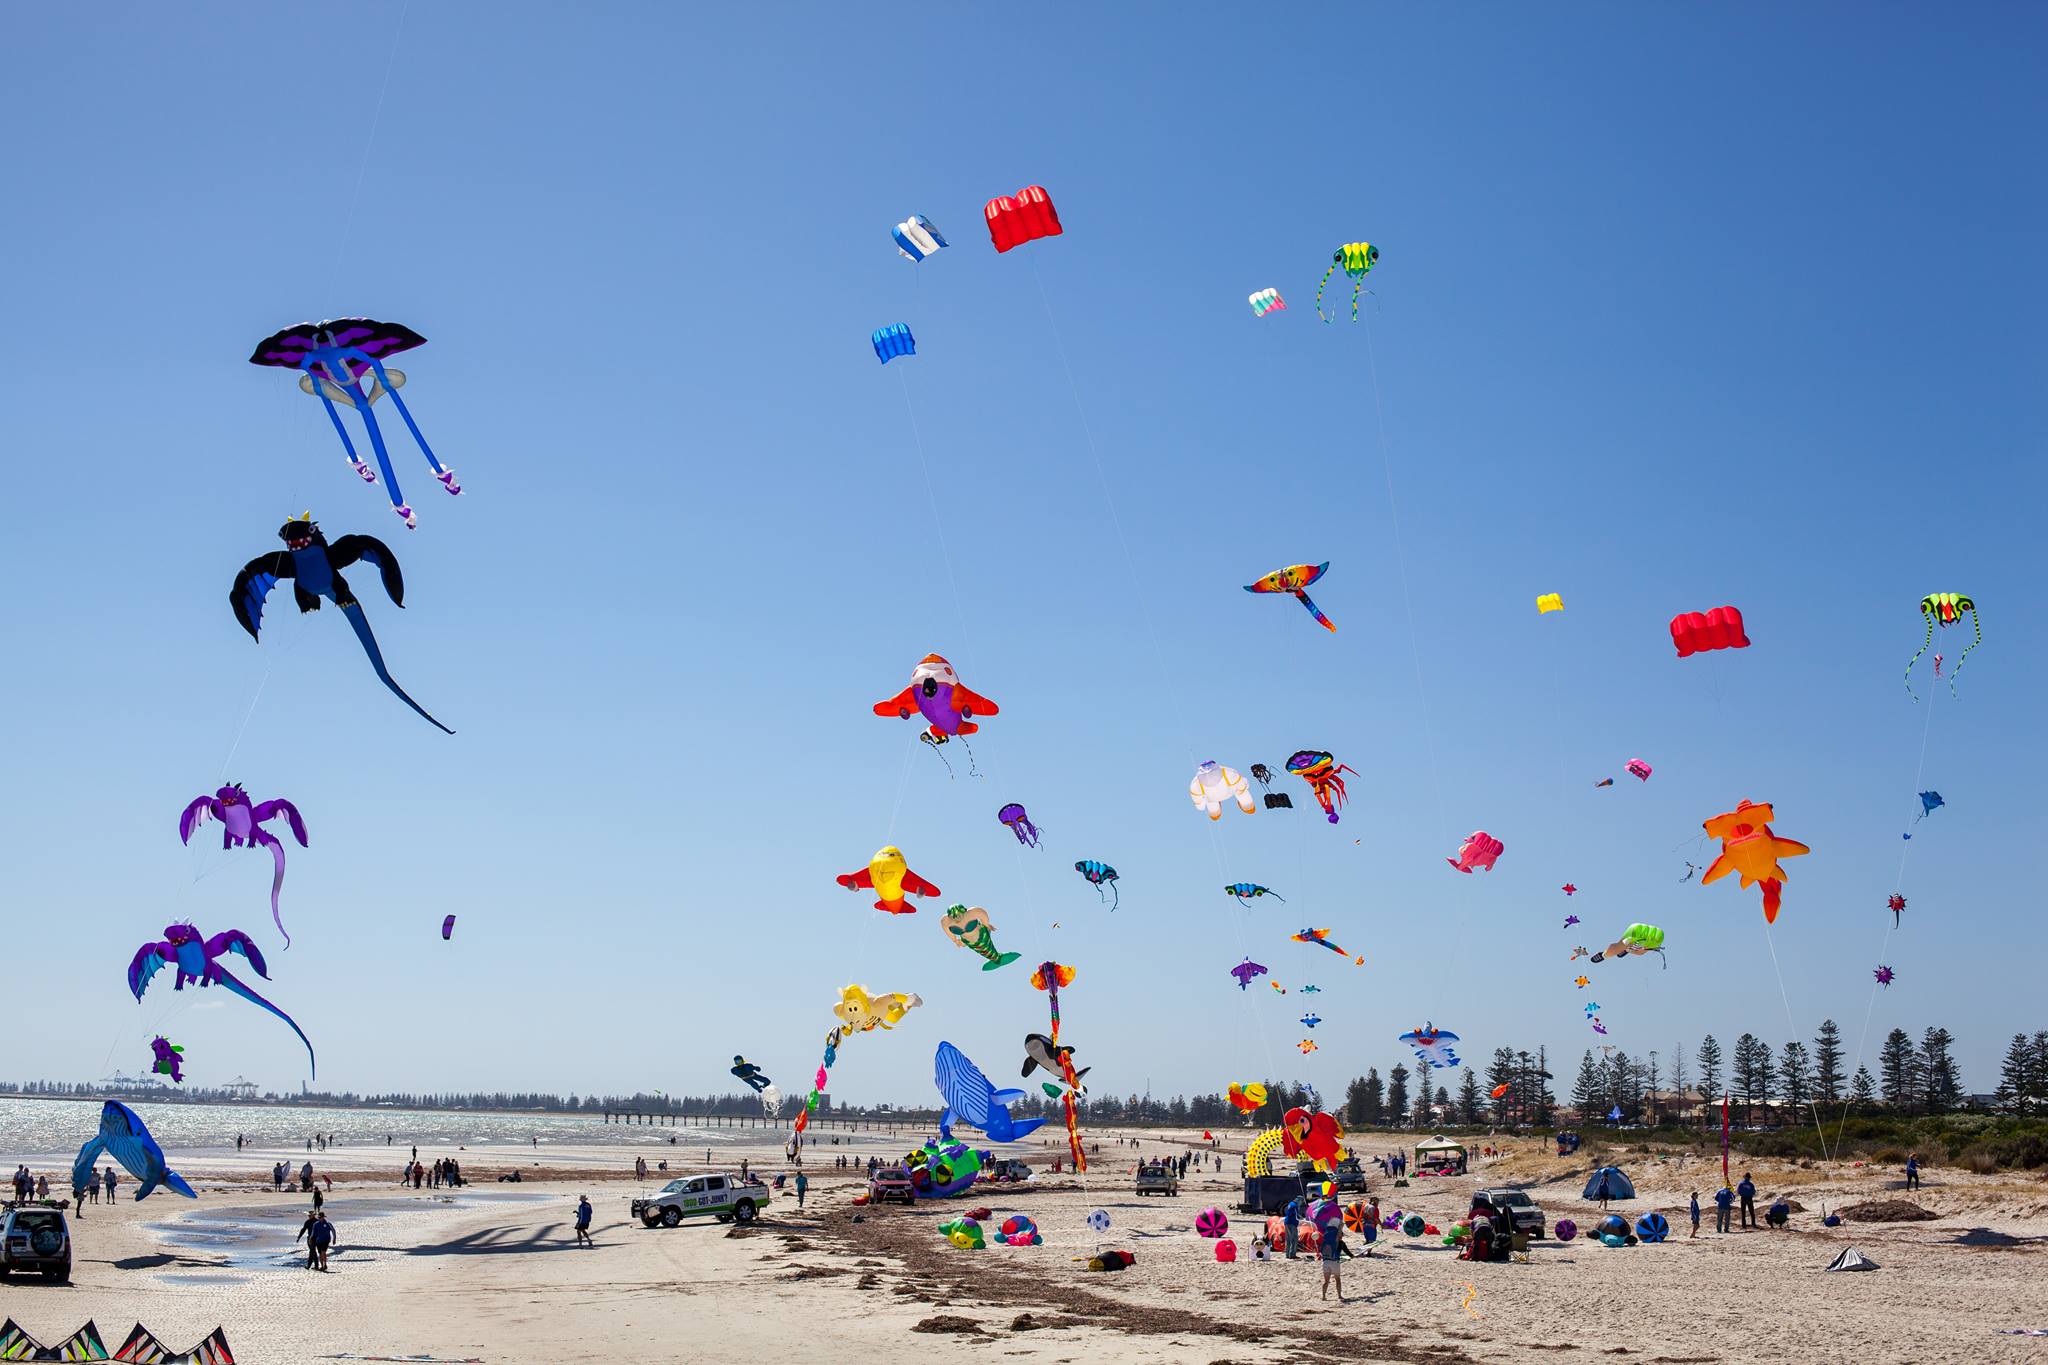 Adelaide Kite Flyers Association – Monthly Fly Day